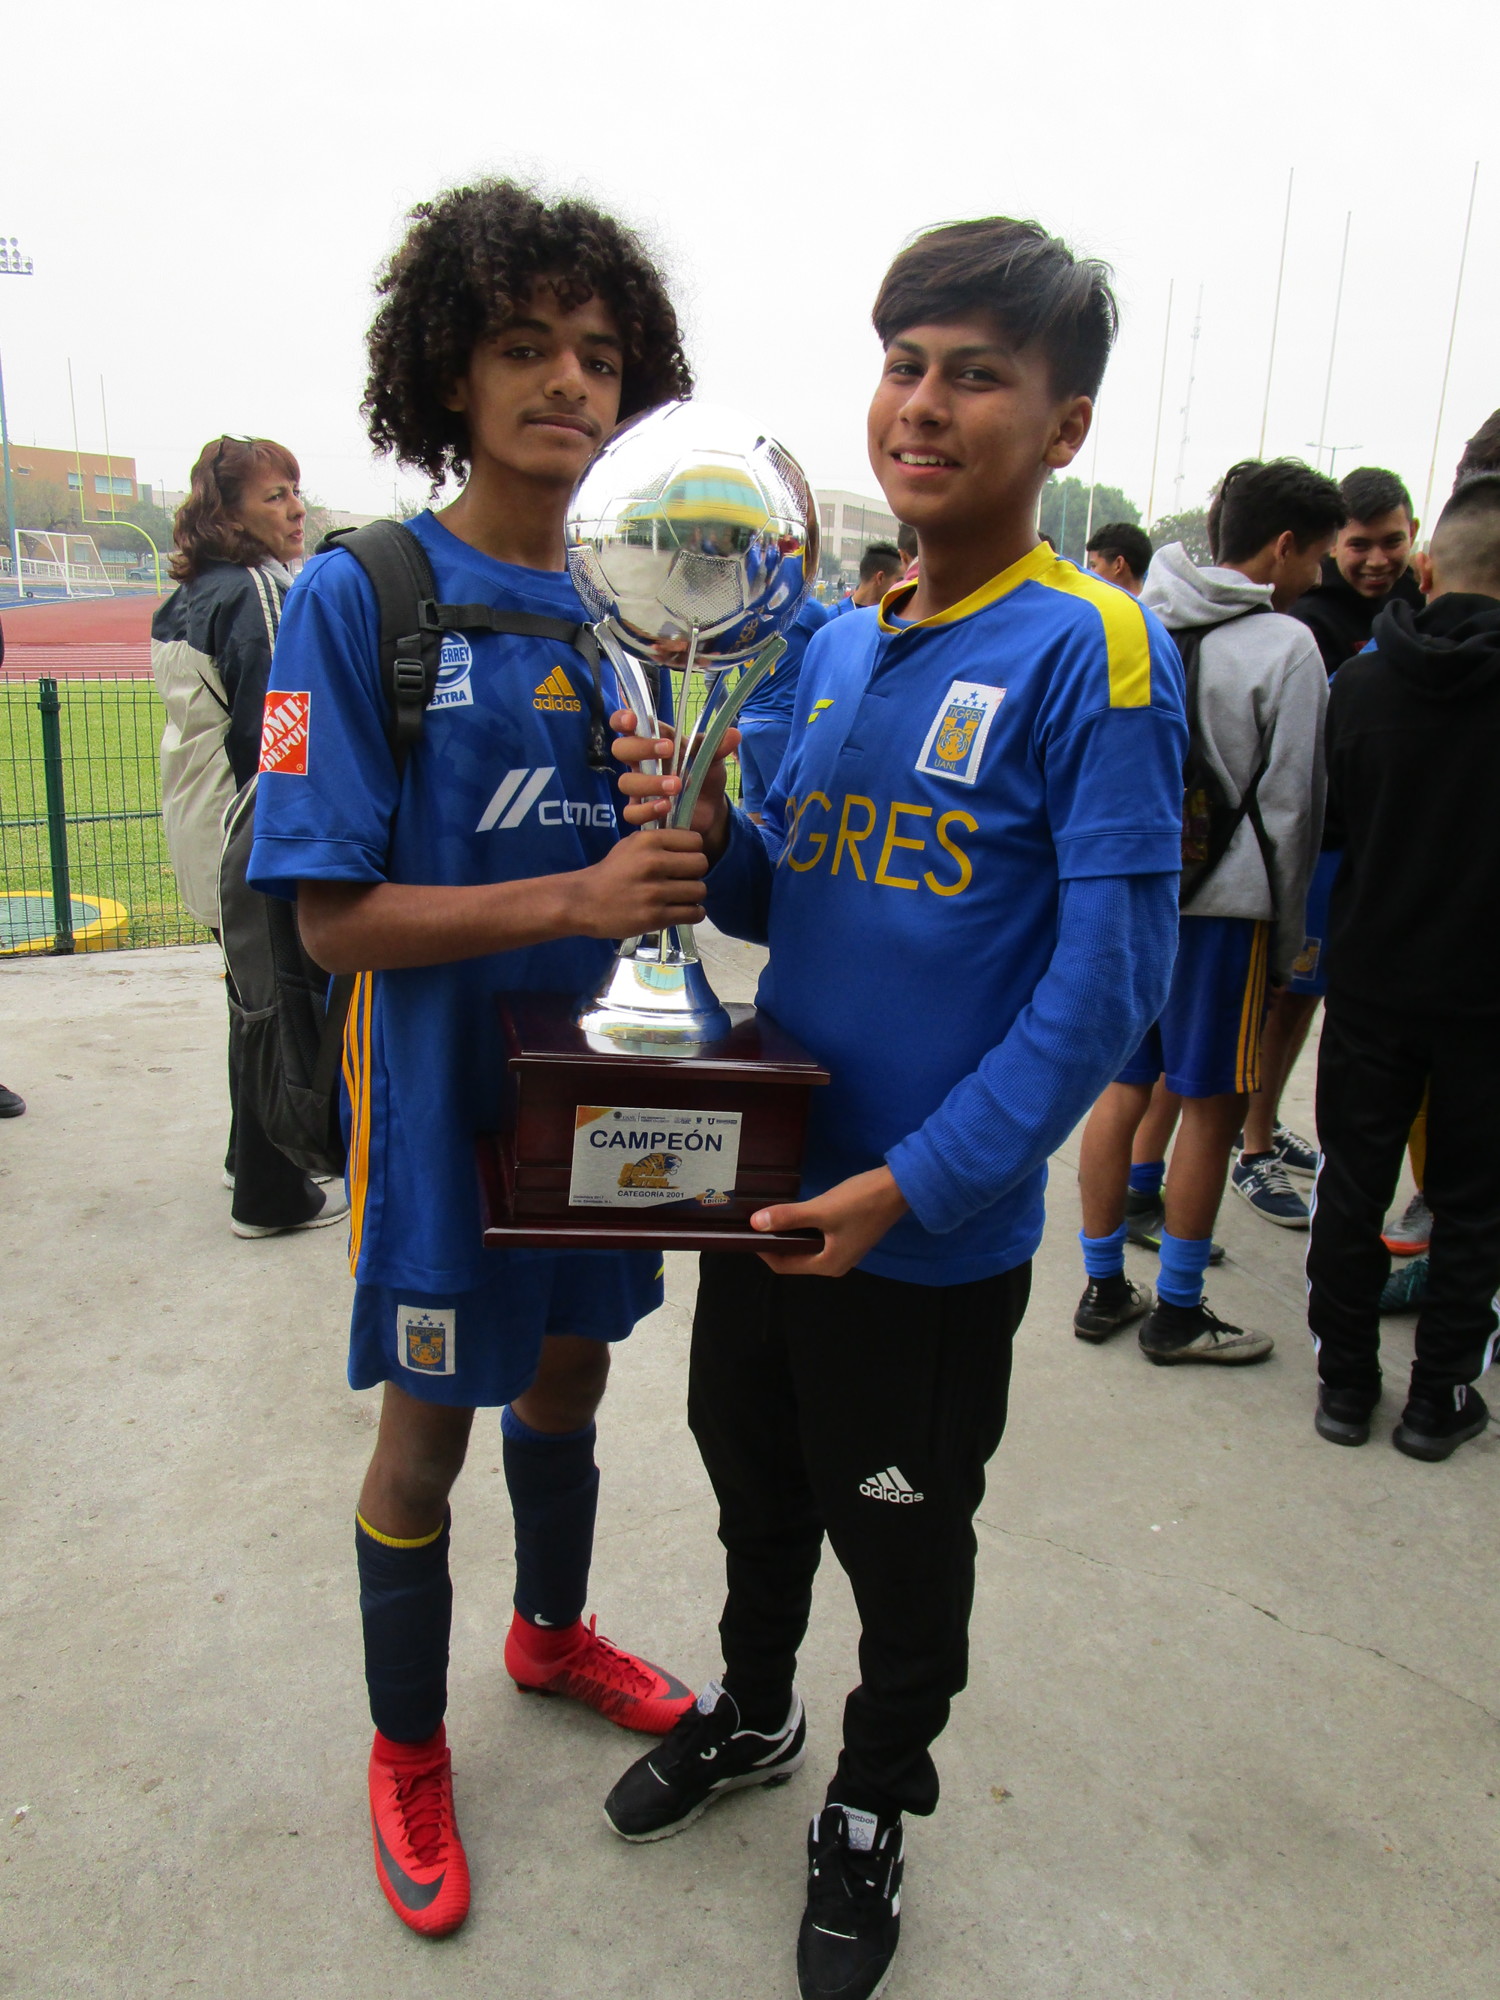 West Orange youths Daniel Rocha and Emerson Nambo show off the trophy they helped the Tigres Orlando team win at a tournament in Monterrey, Mexico.